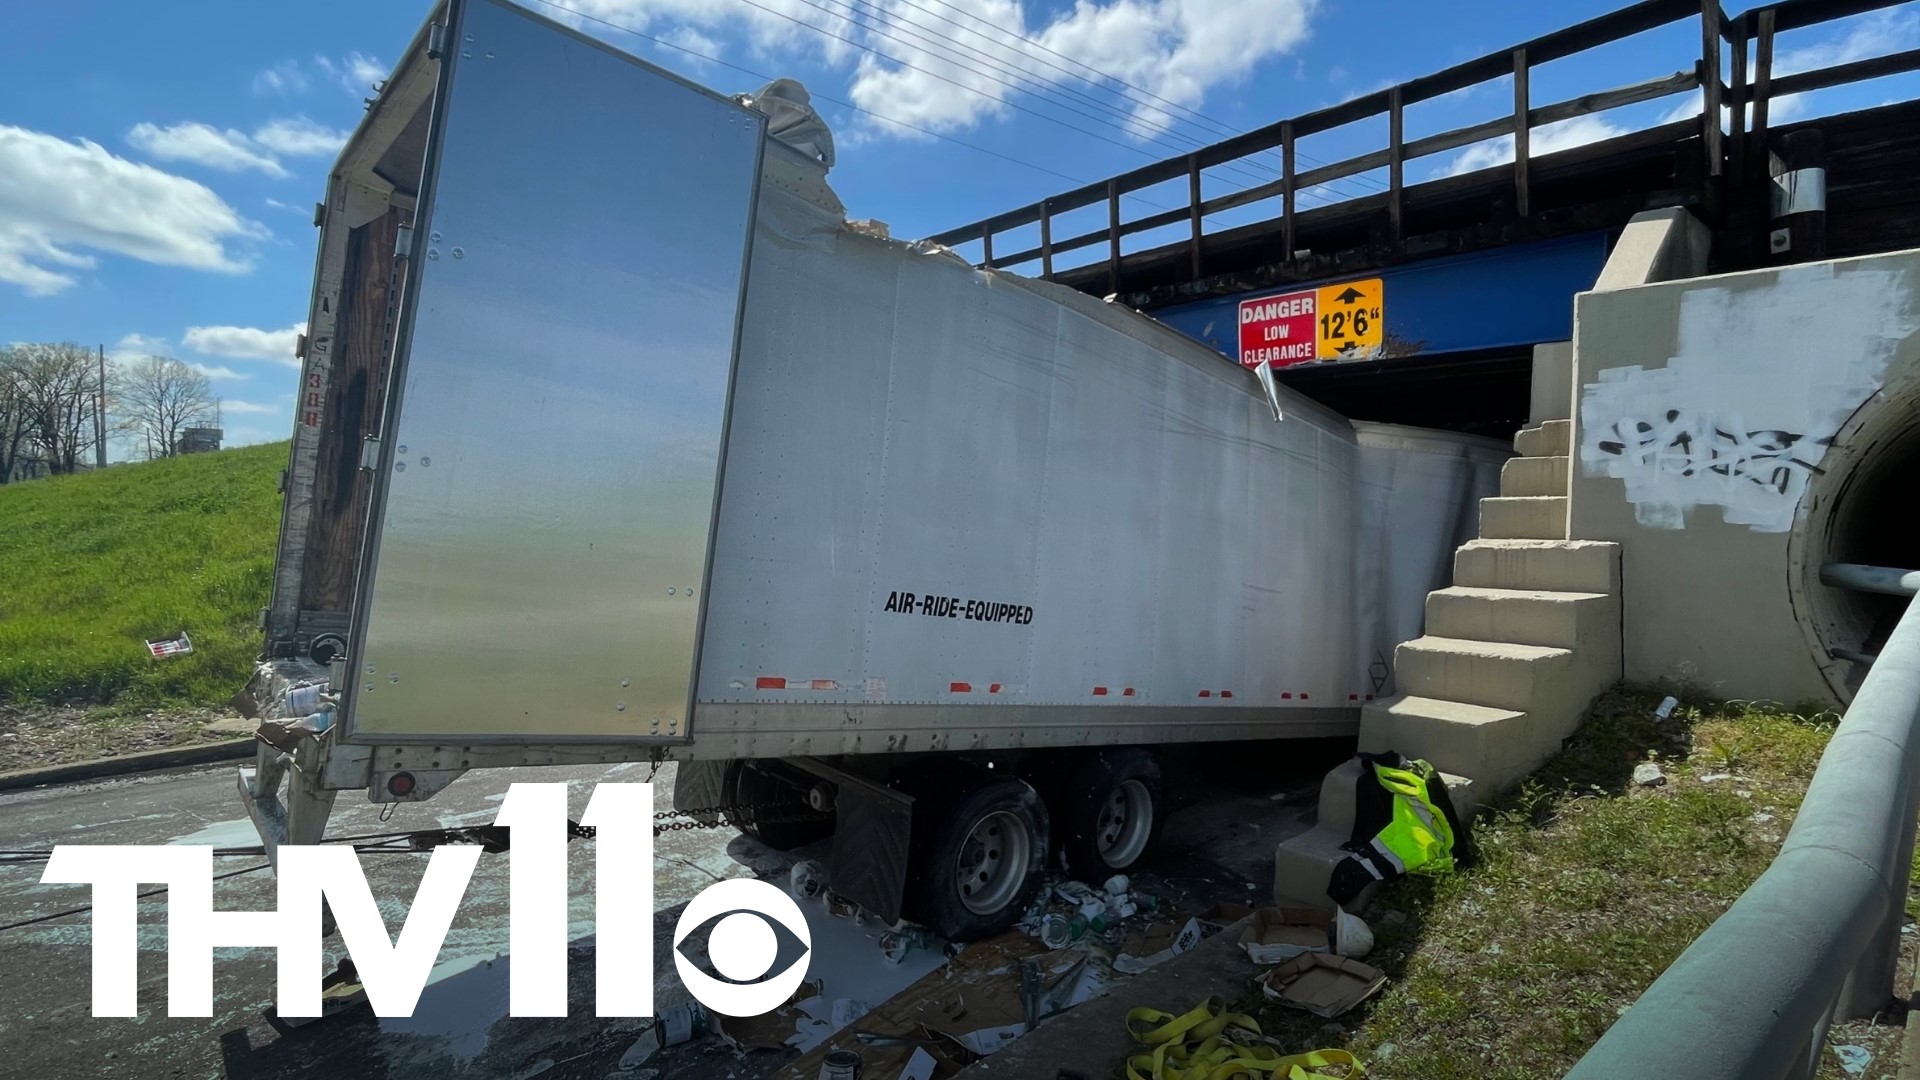 A bridge will need to be inspected after a truck got stuck underneath it in North Little Rock, Arkansas.